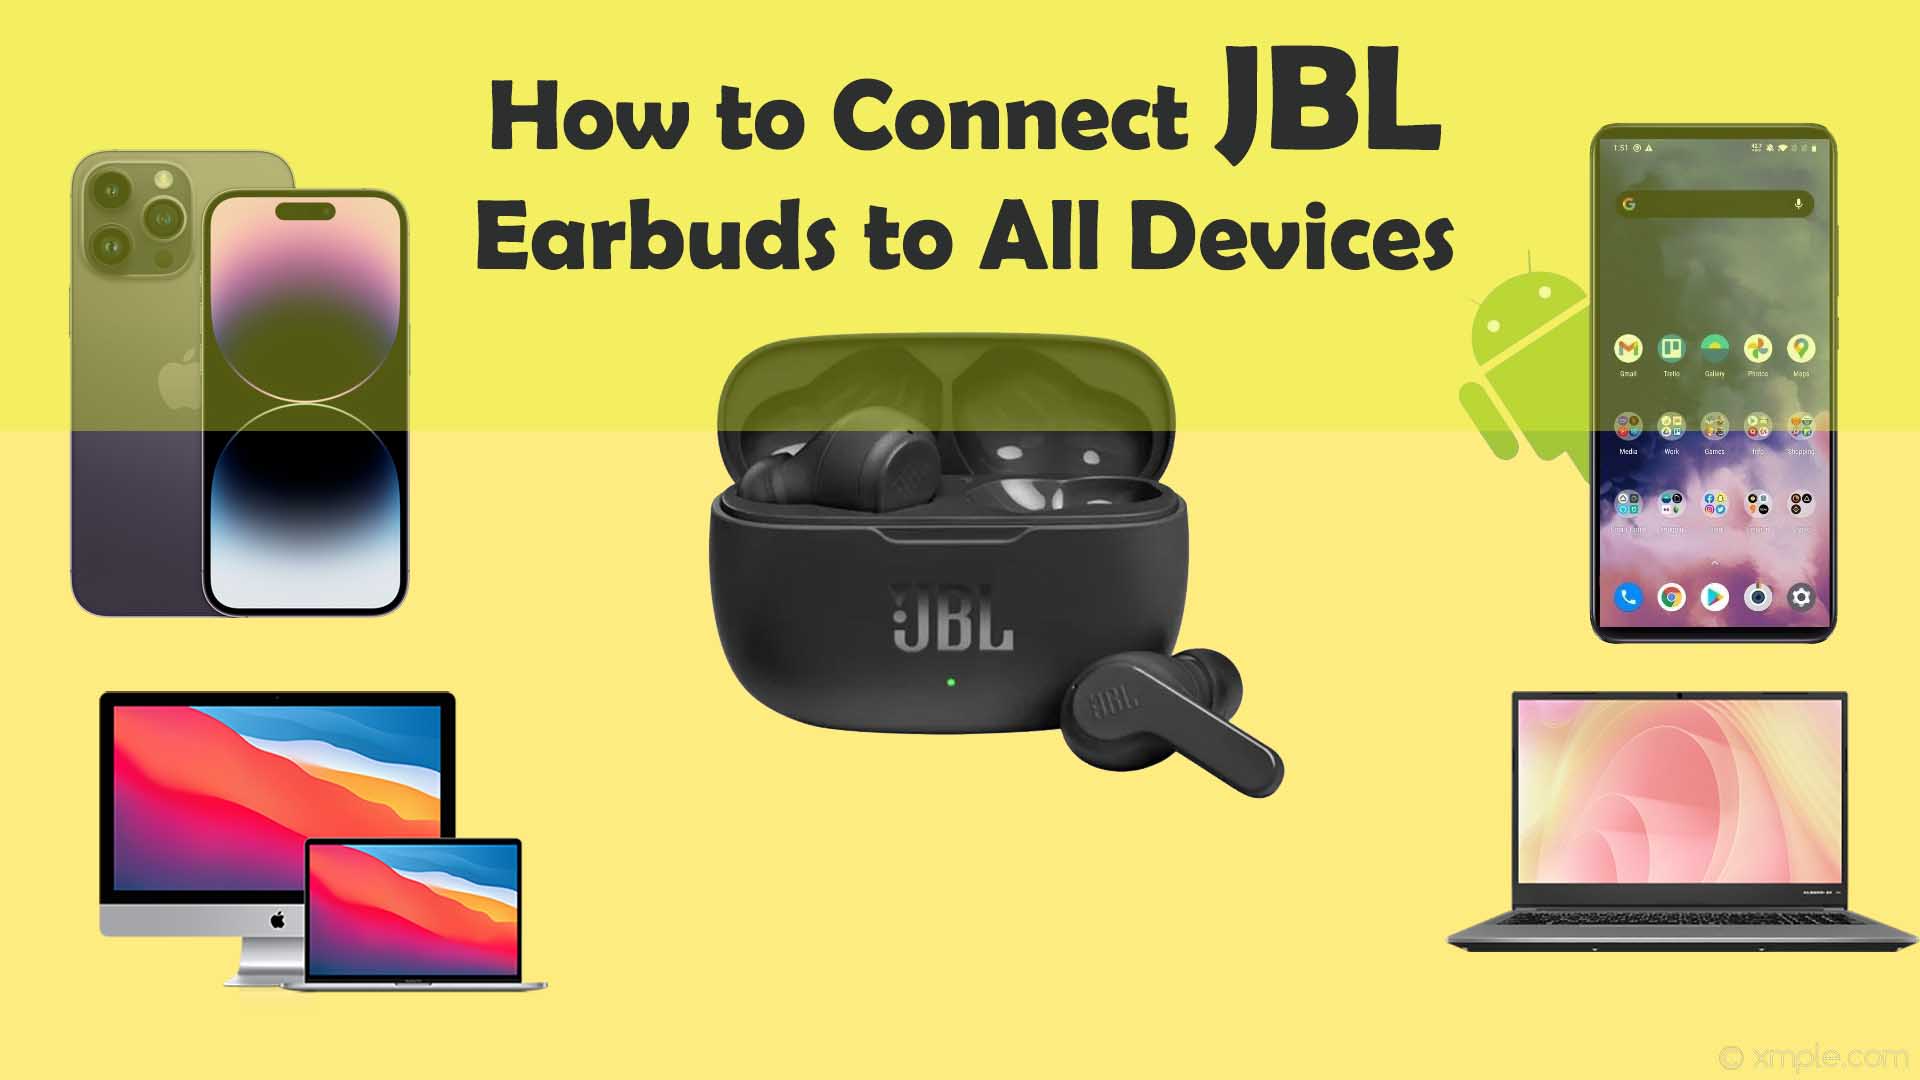 How to Connect JBL Earbuds to iPhone, Android, & Other Devices